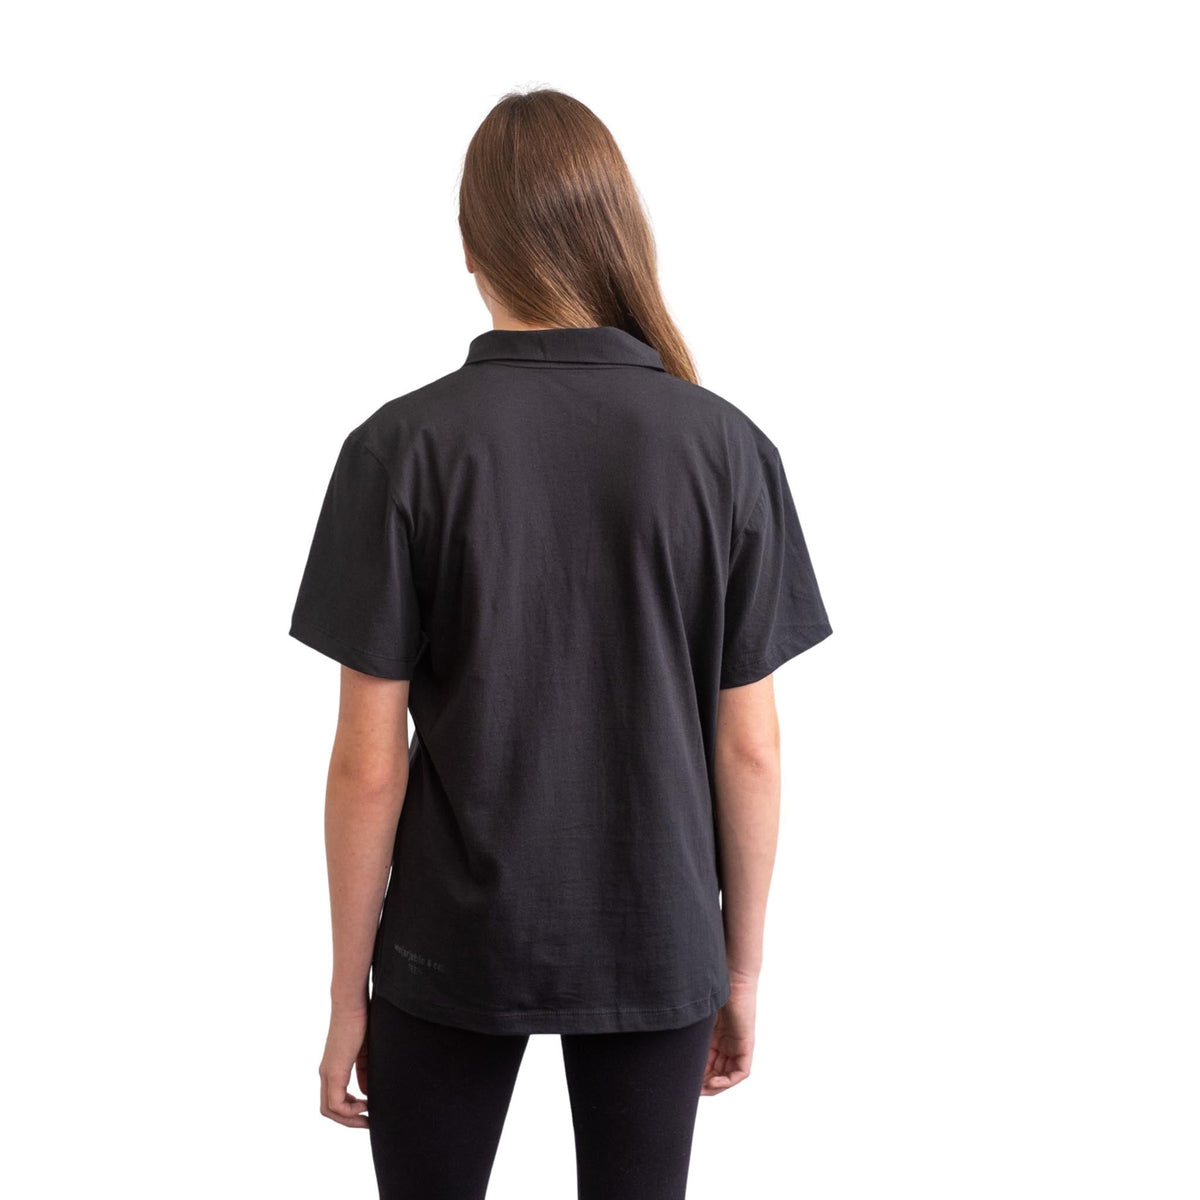 The Comfy Polo-Womens. No tags, no lables. The Shapes United